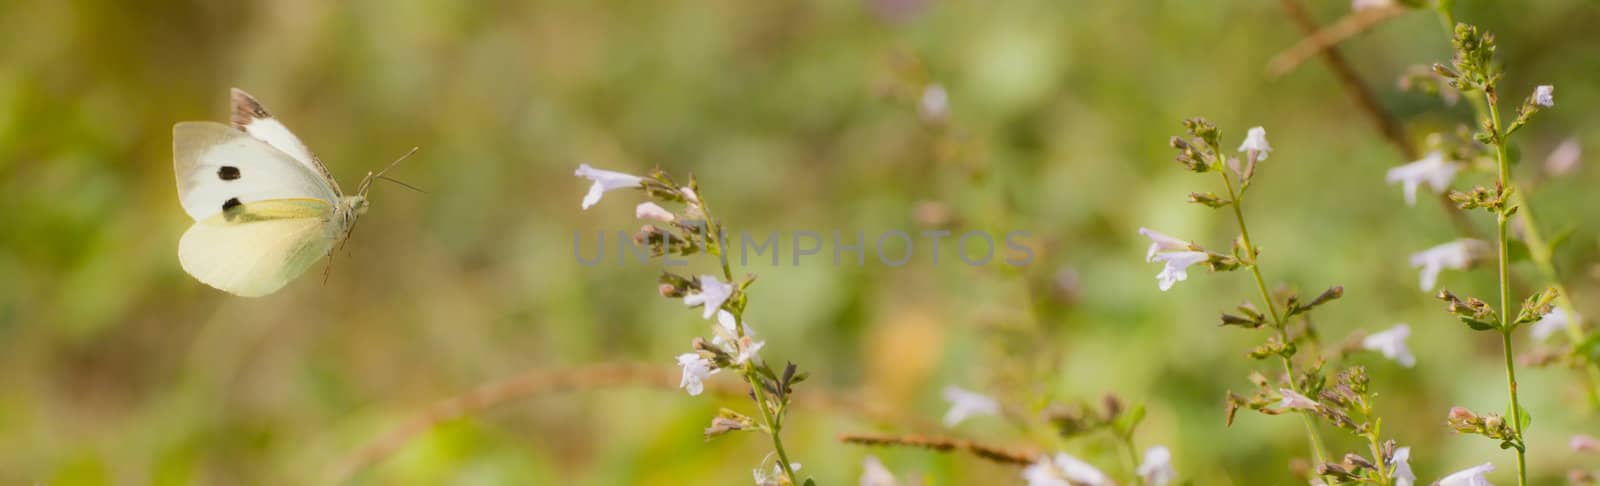 Great white butterfly sucking nectar on meadow flowers by AlessandroZocc